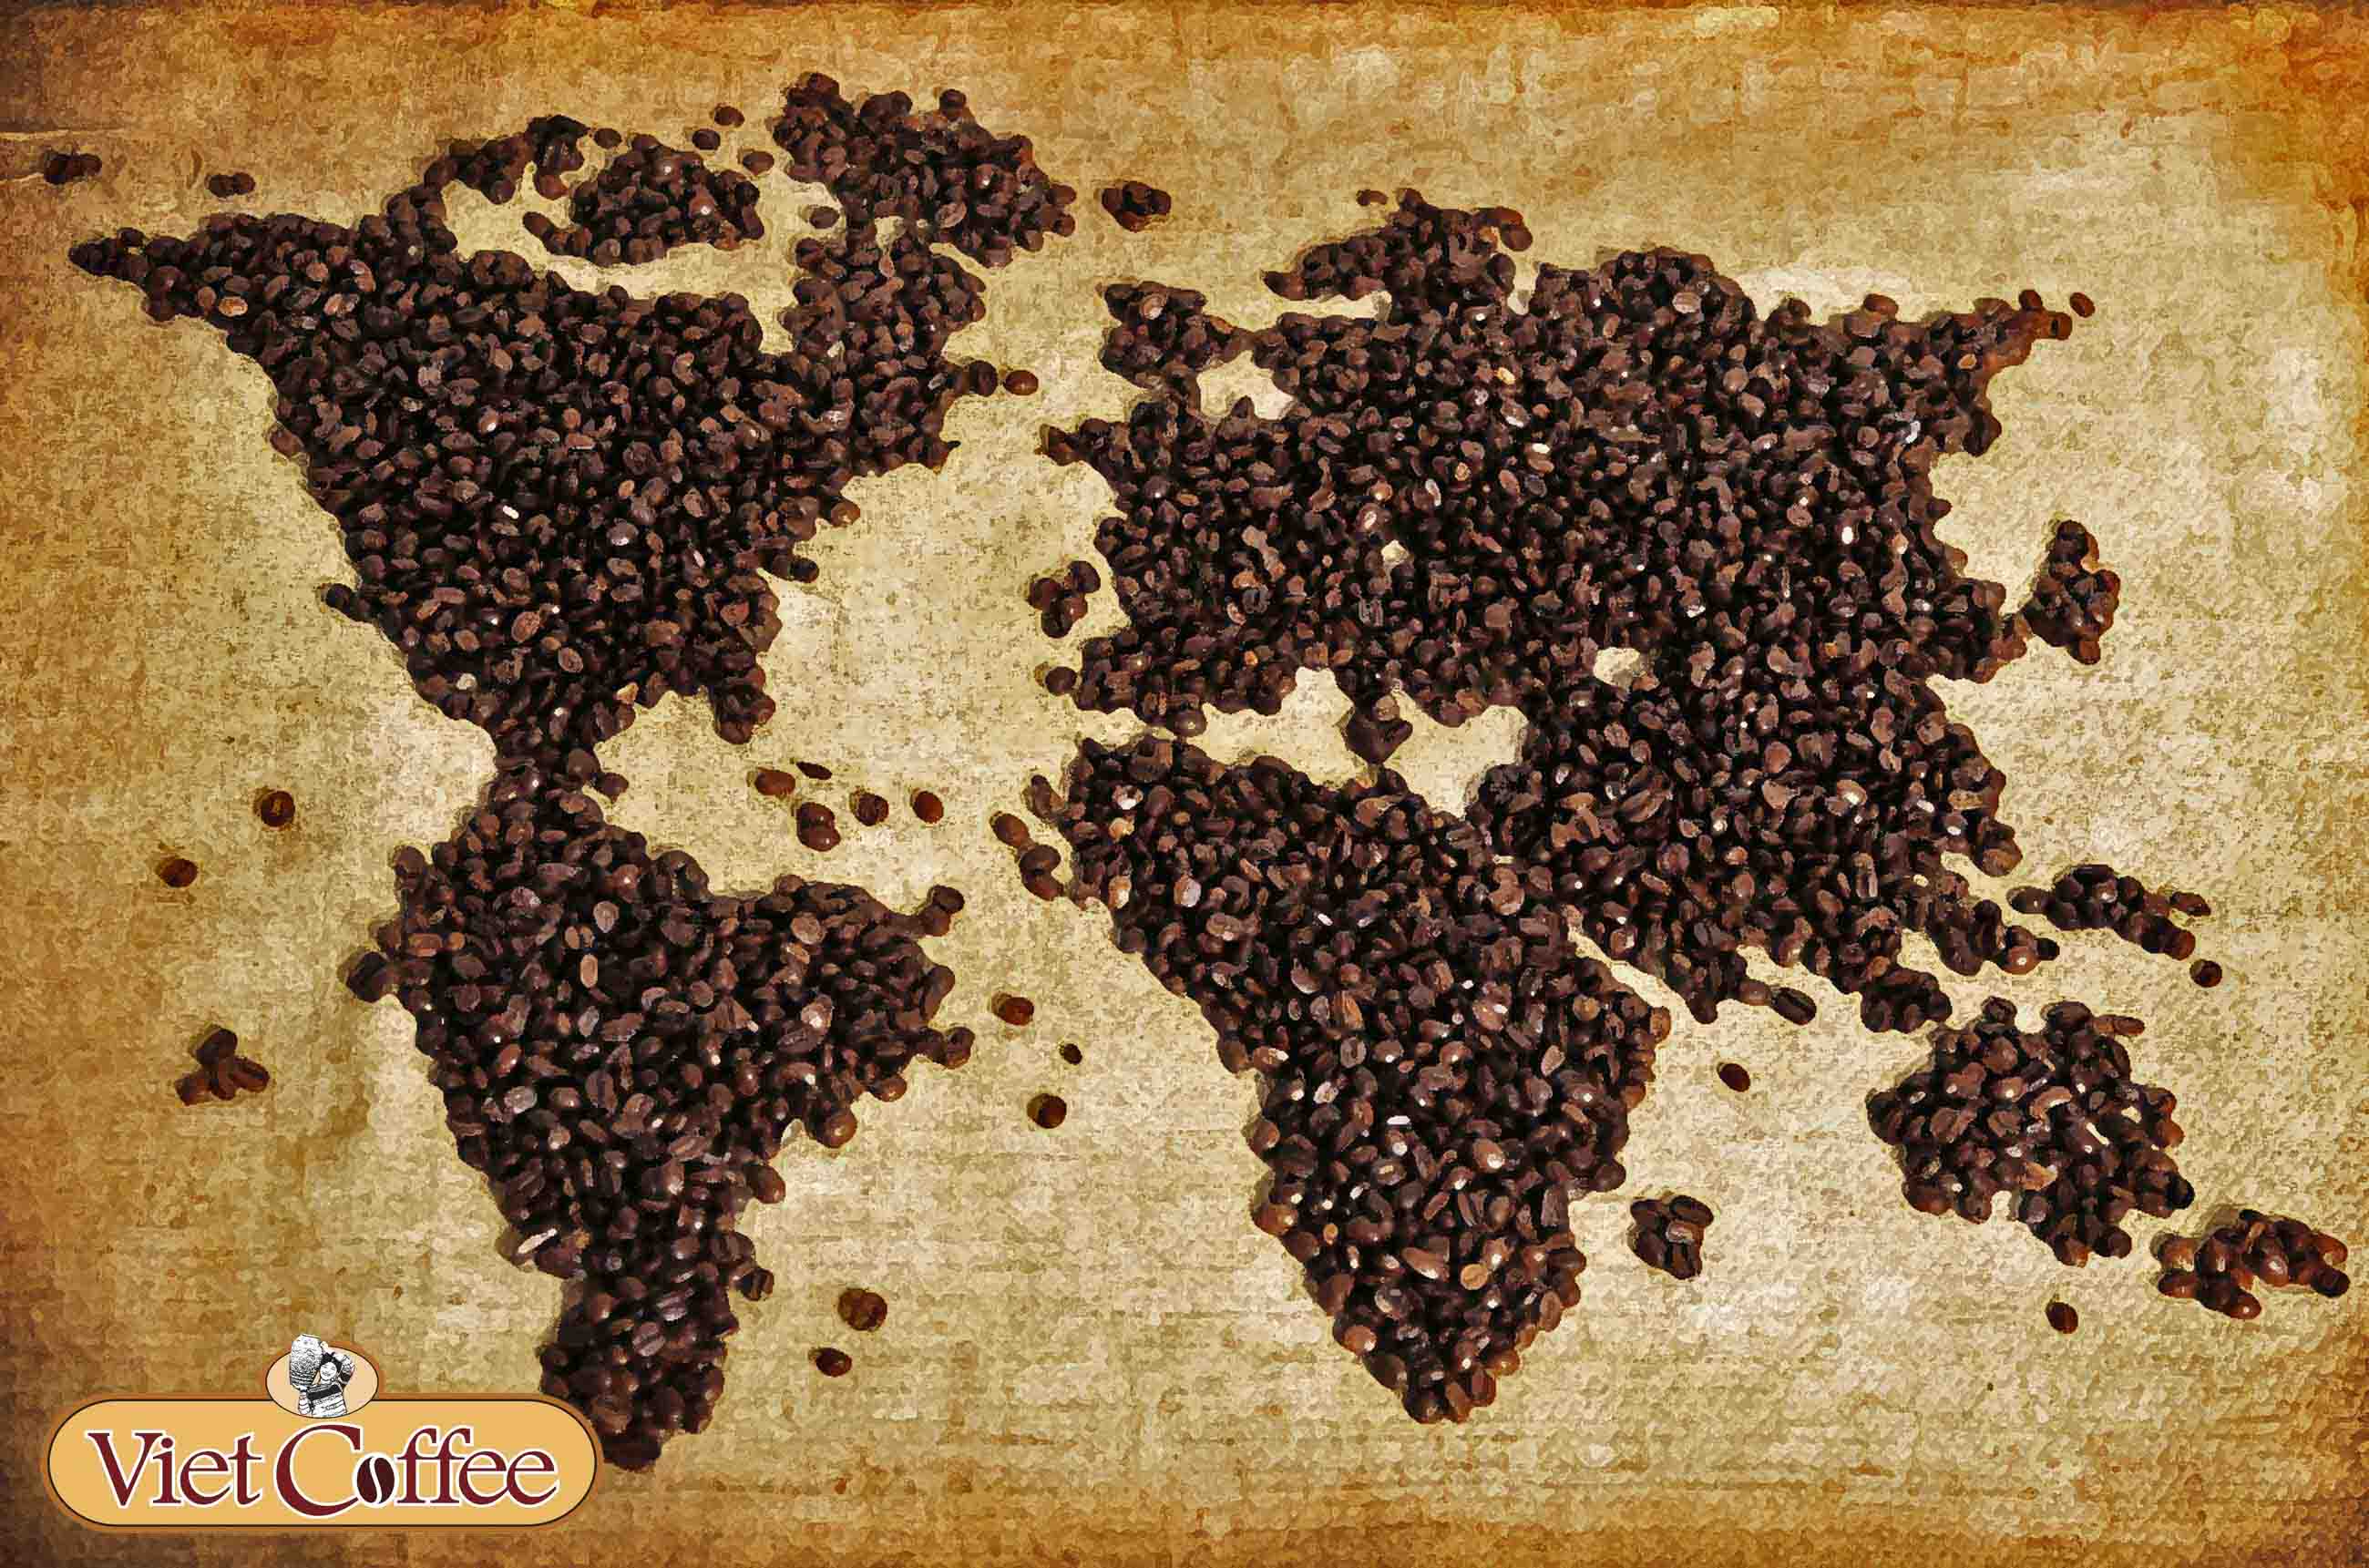 Coffee has become a popular drink around the world